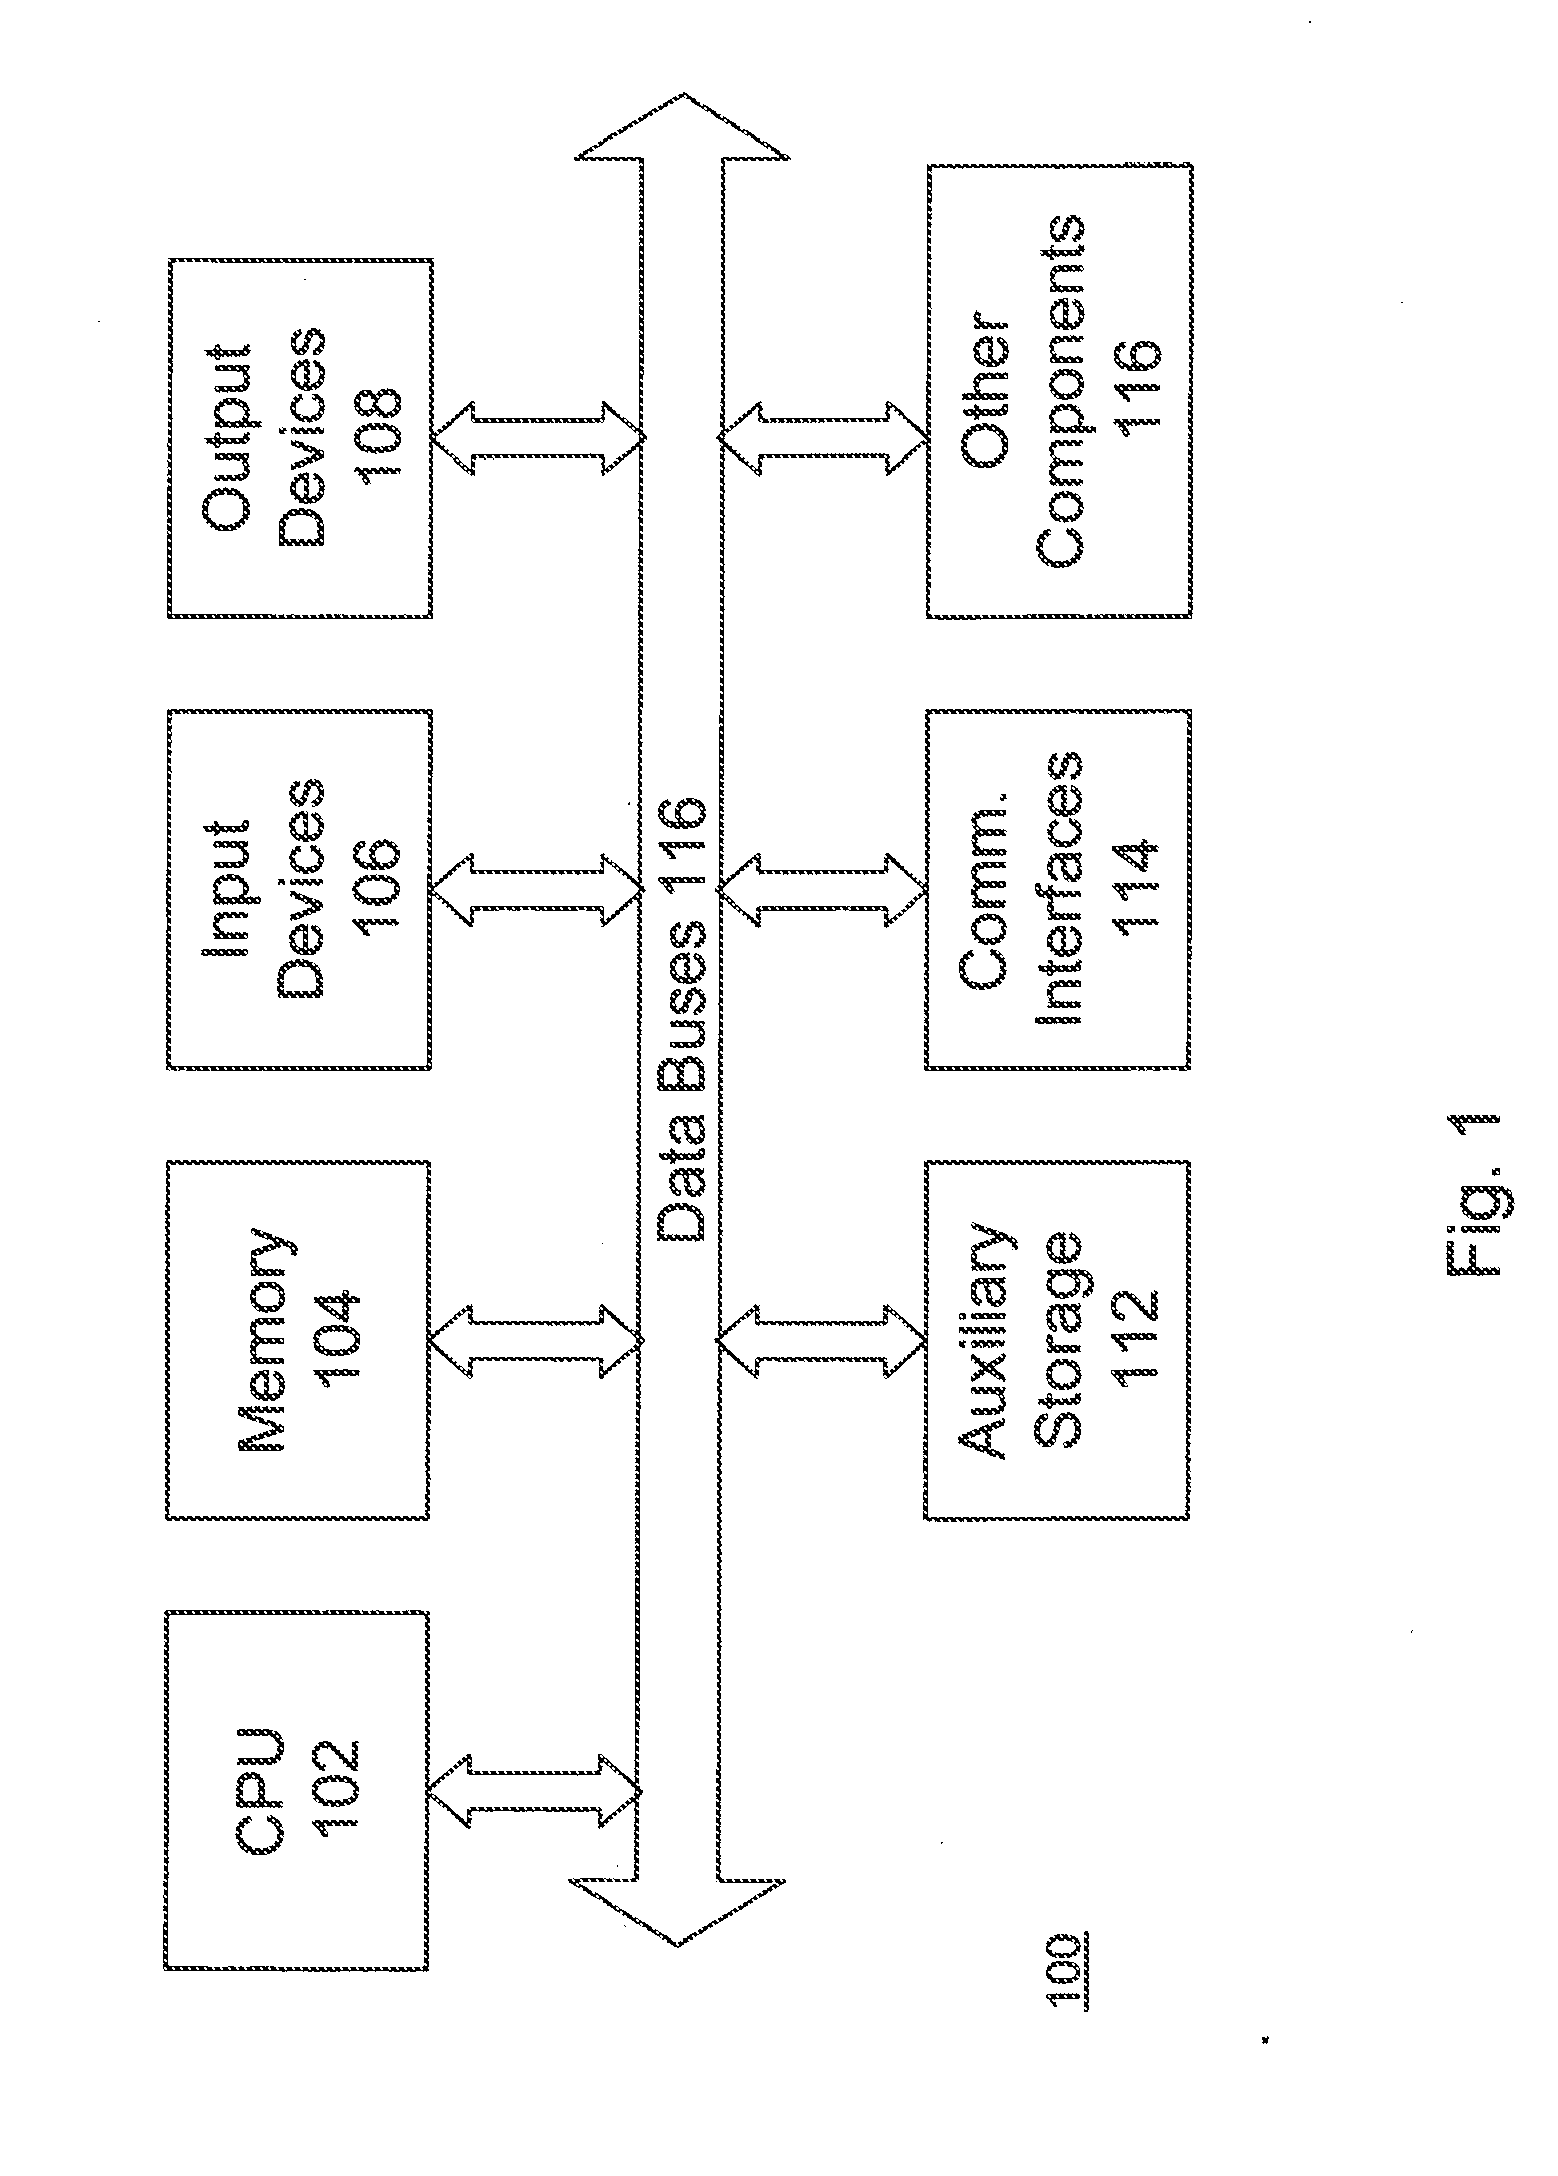 Method for Implementing a High-Level Image Representation for Image Analysis